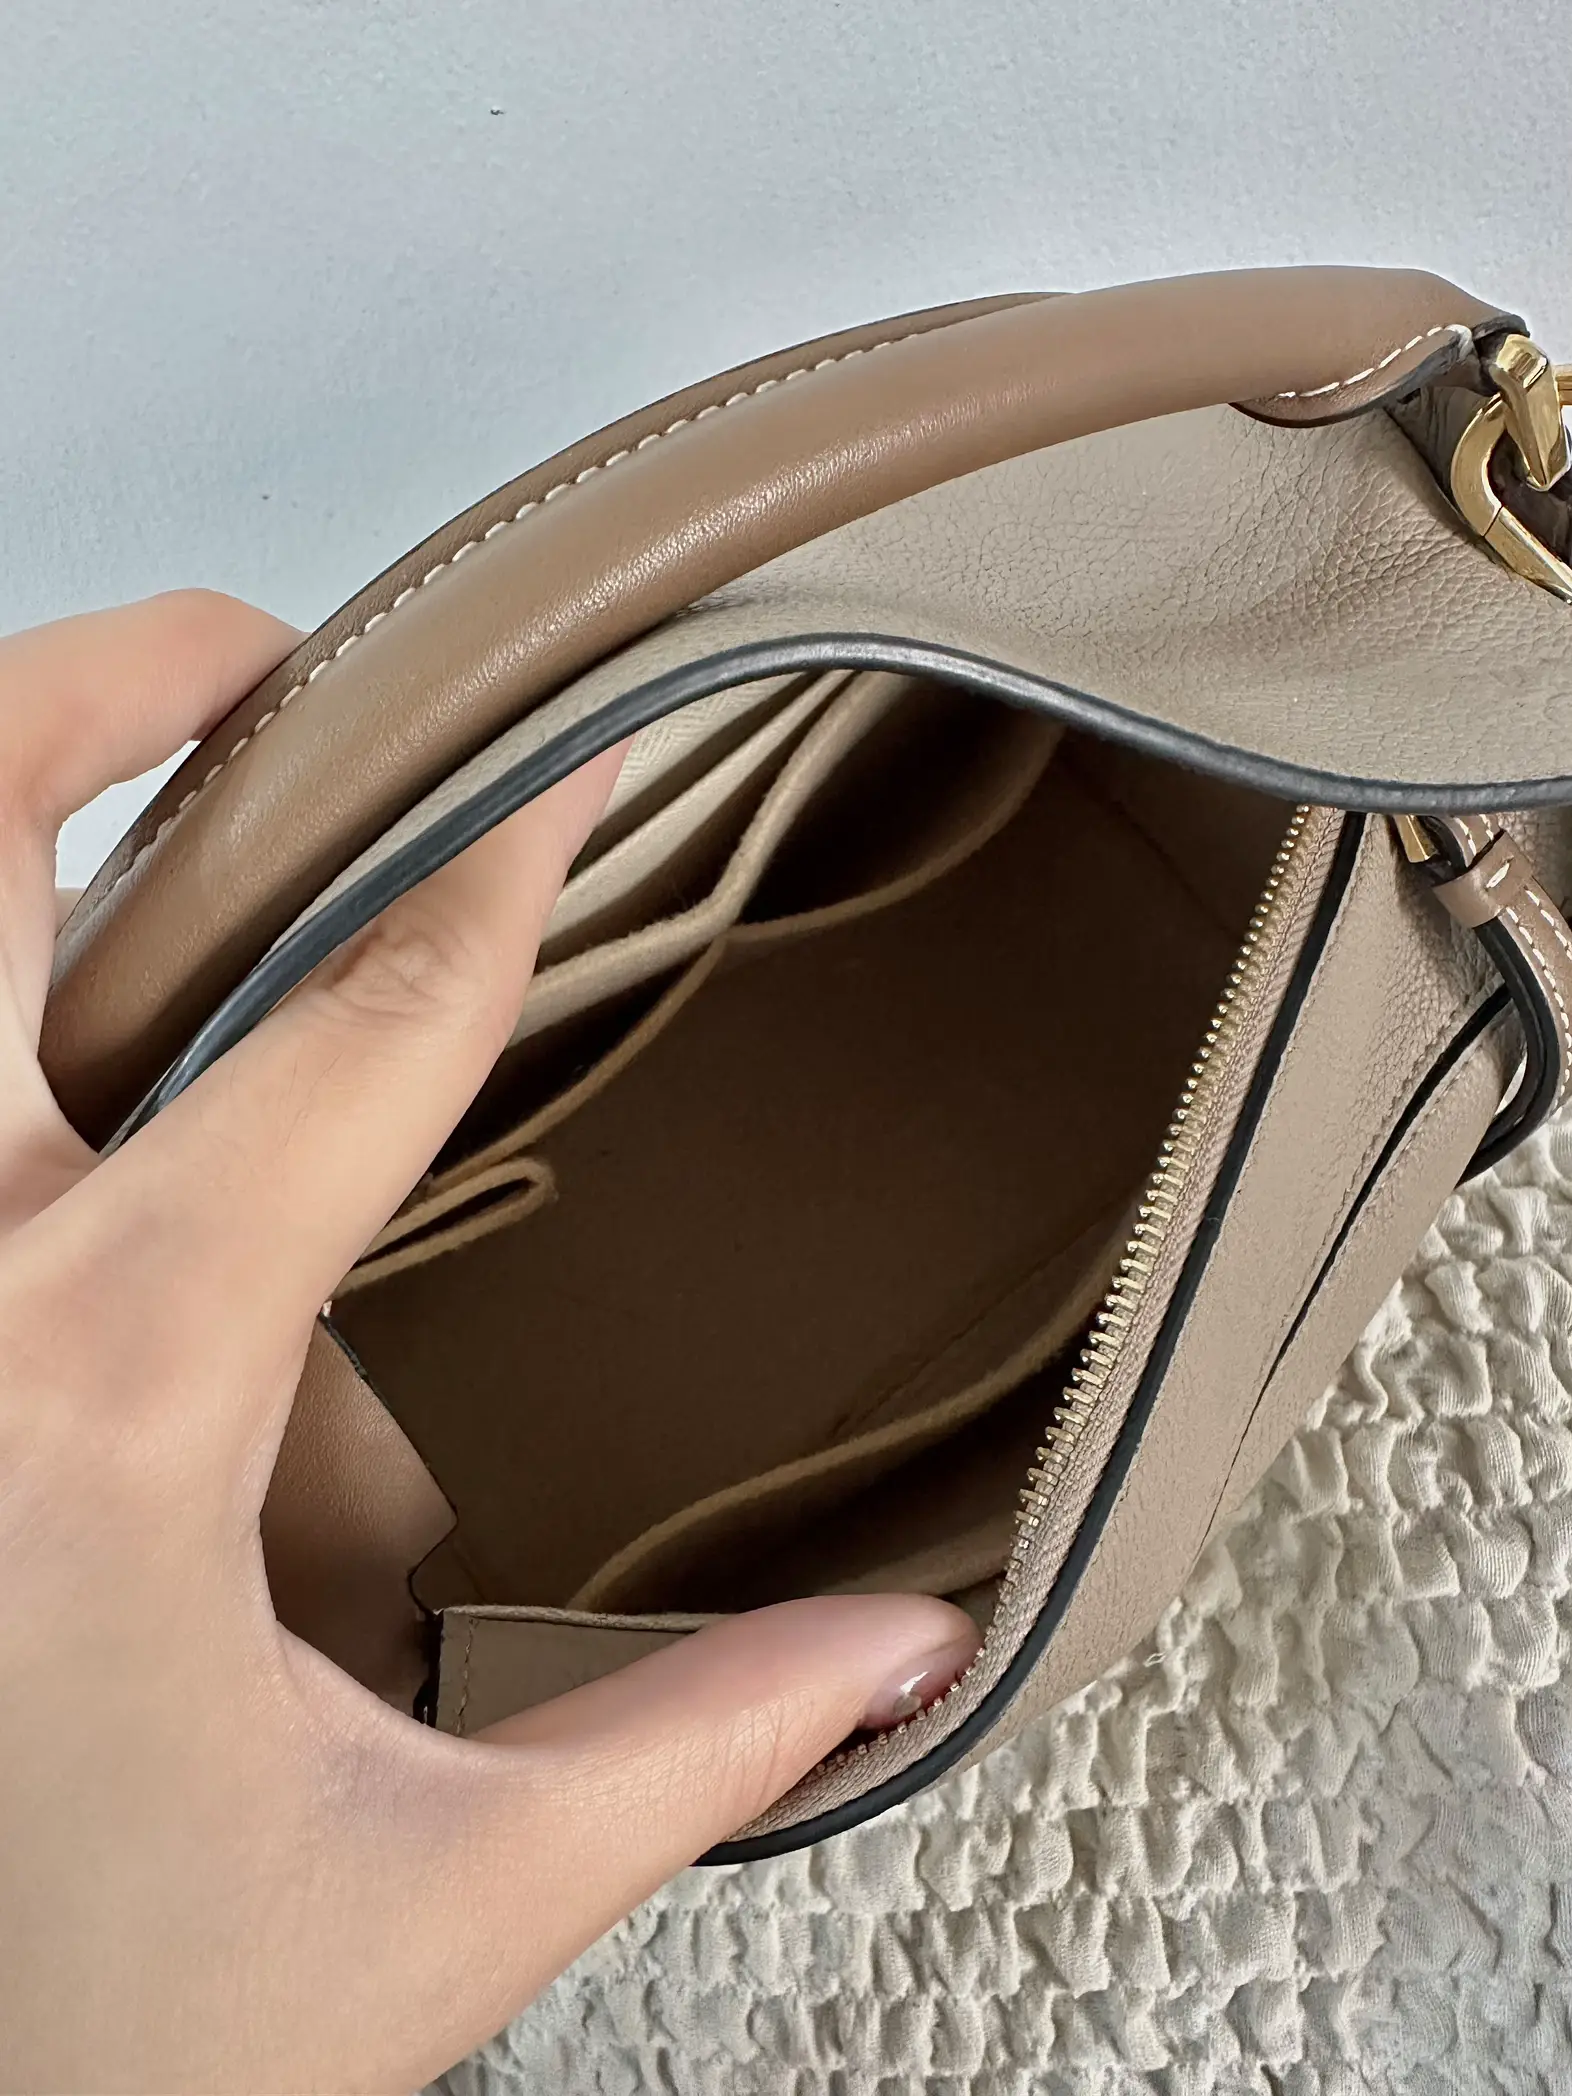 LOEWE SMALL PUZZLE BAG HONEST REVIEW